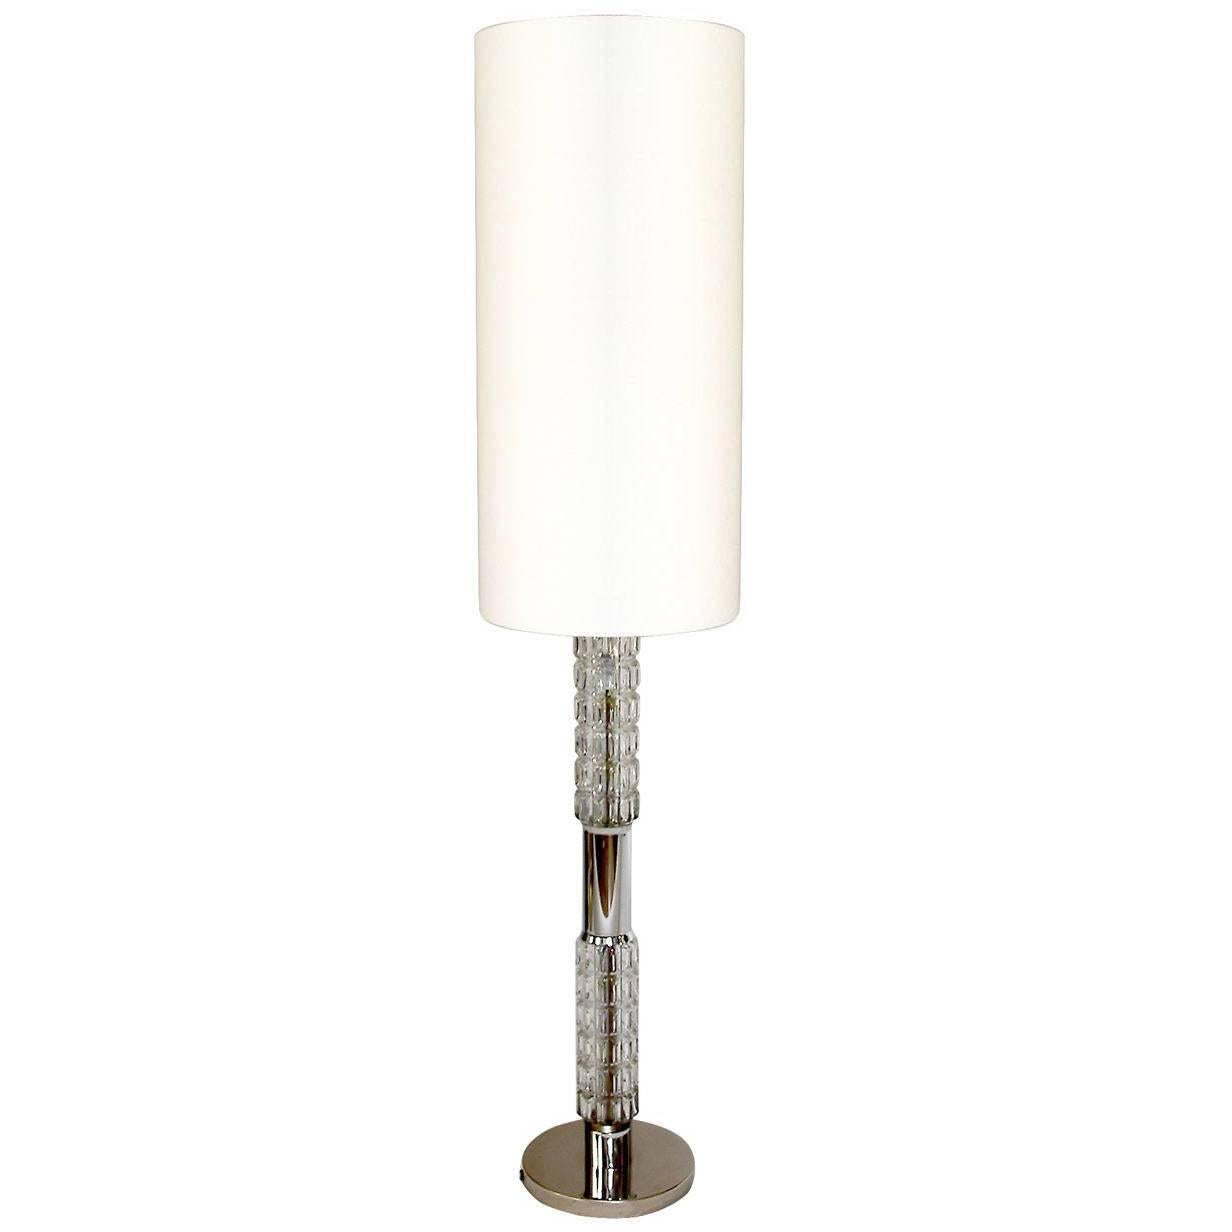 Richard Essig Floor or Table Lamp with Illuminated Glass Stand, 1970s